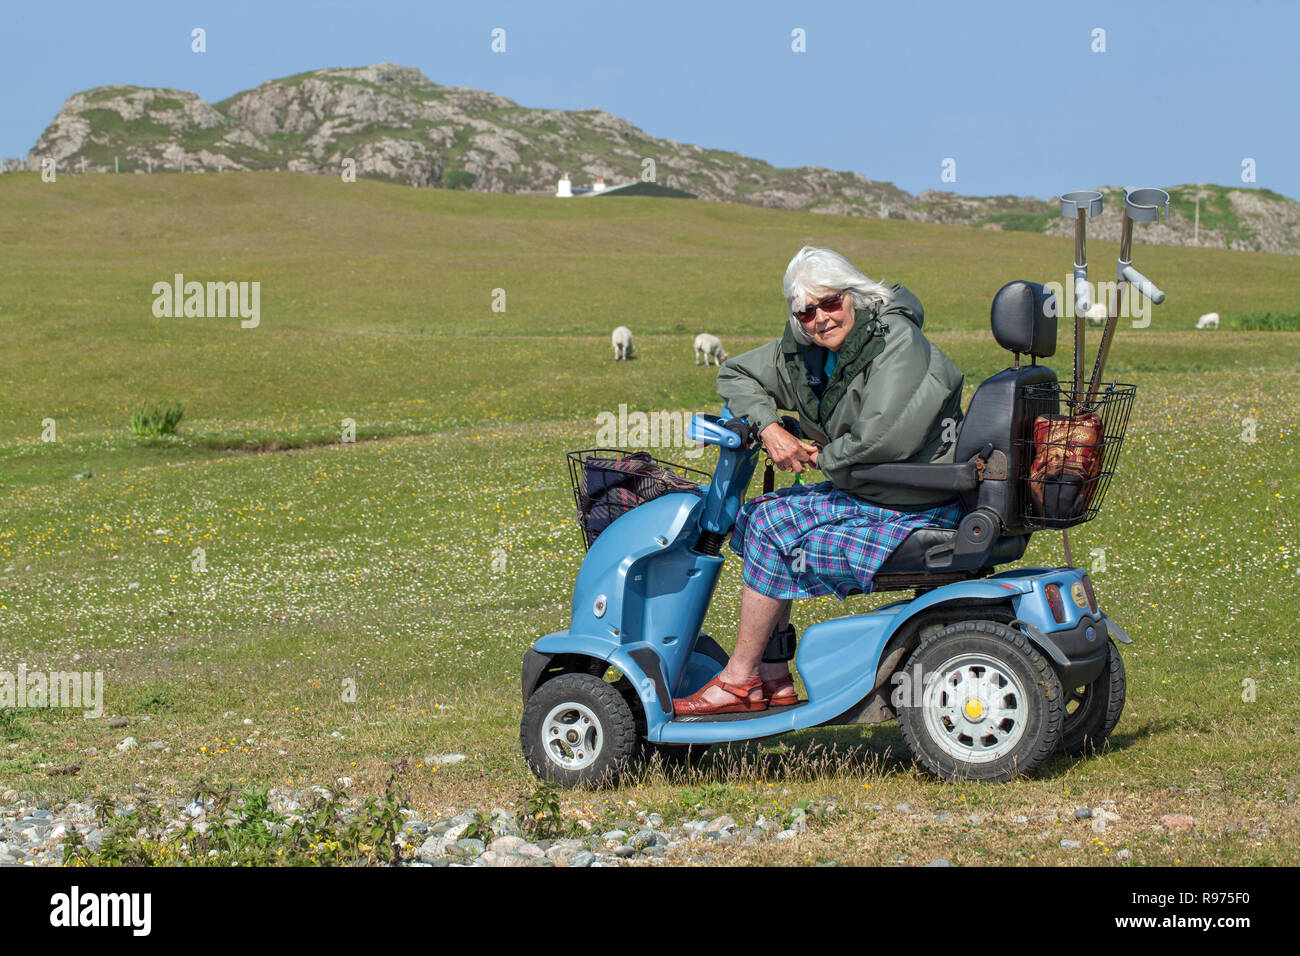 Disabled. Physically impaired. OAP. An elderly woman, driving a four-wheeled electric vehicle giving enjoyable independence and access to the rural scene, countryside and environment generally. Iona. The Inner Hebrides. Argyll and Bute, Scotland. Stock Photo